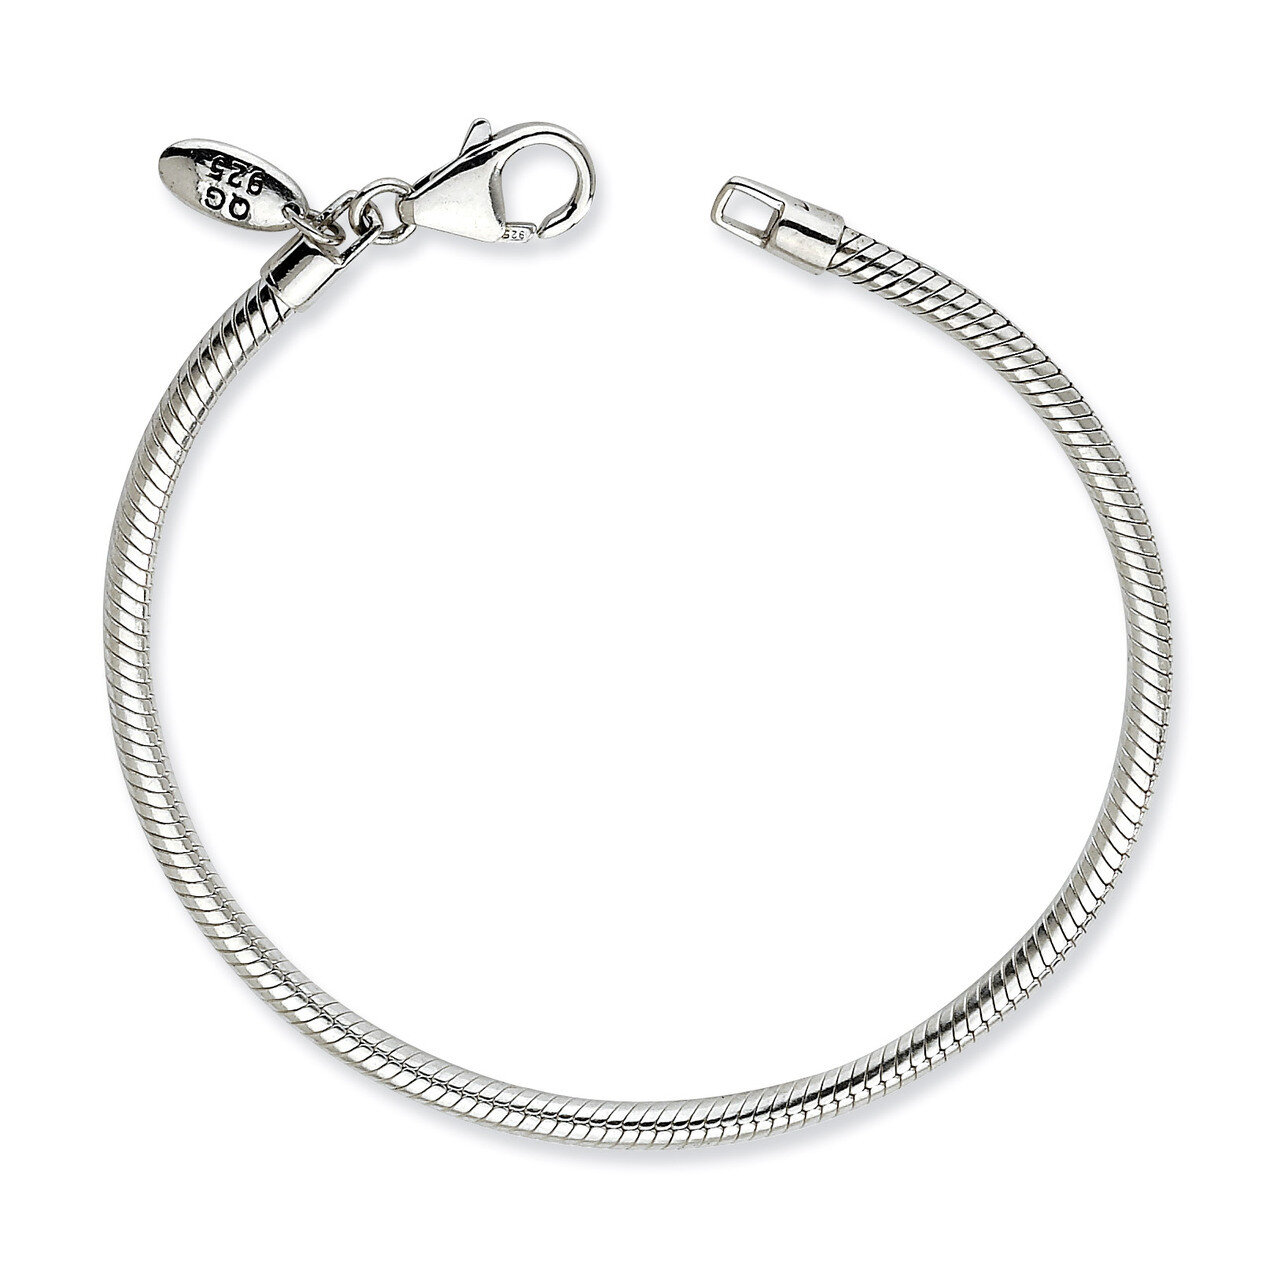 8 Inch Lobster Clasp Bead Bracelet - Sterling Silver QRS984-8